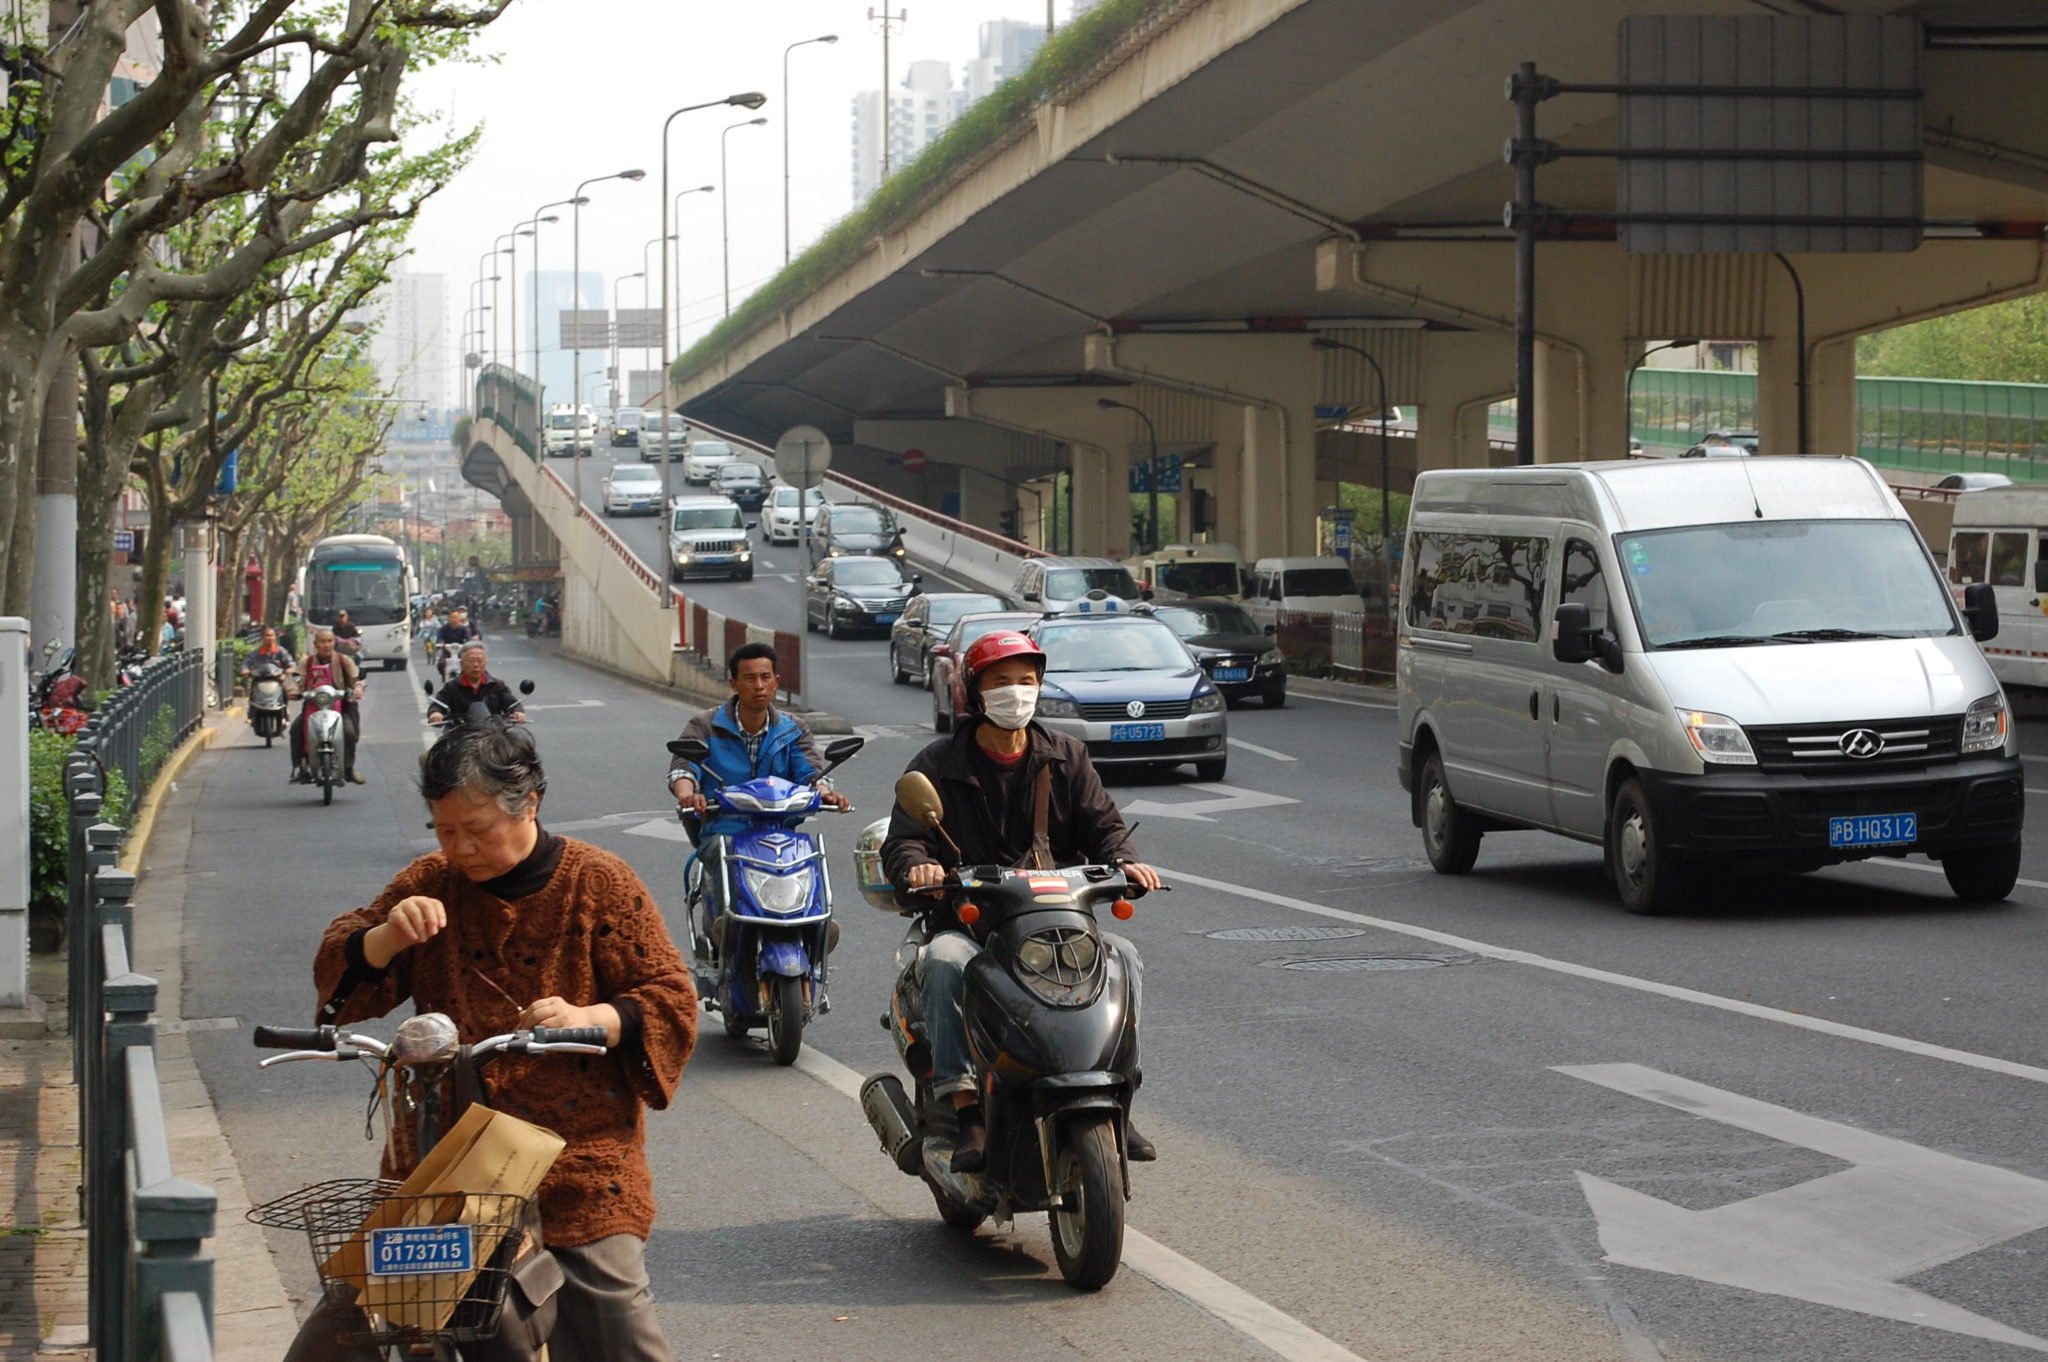 Motorcycles in China: Commute or Entertainment?